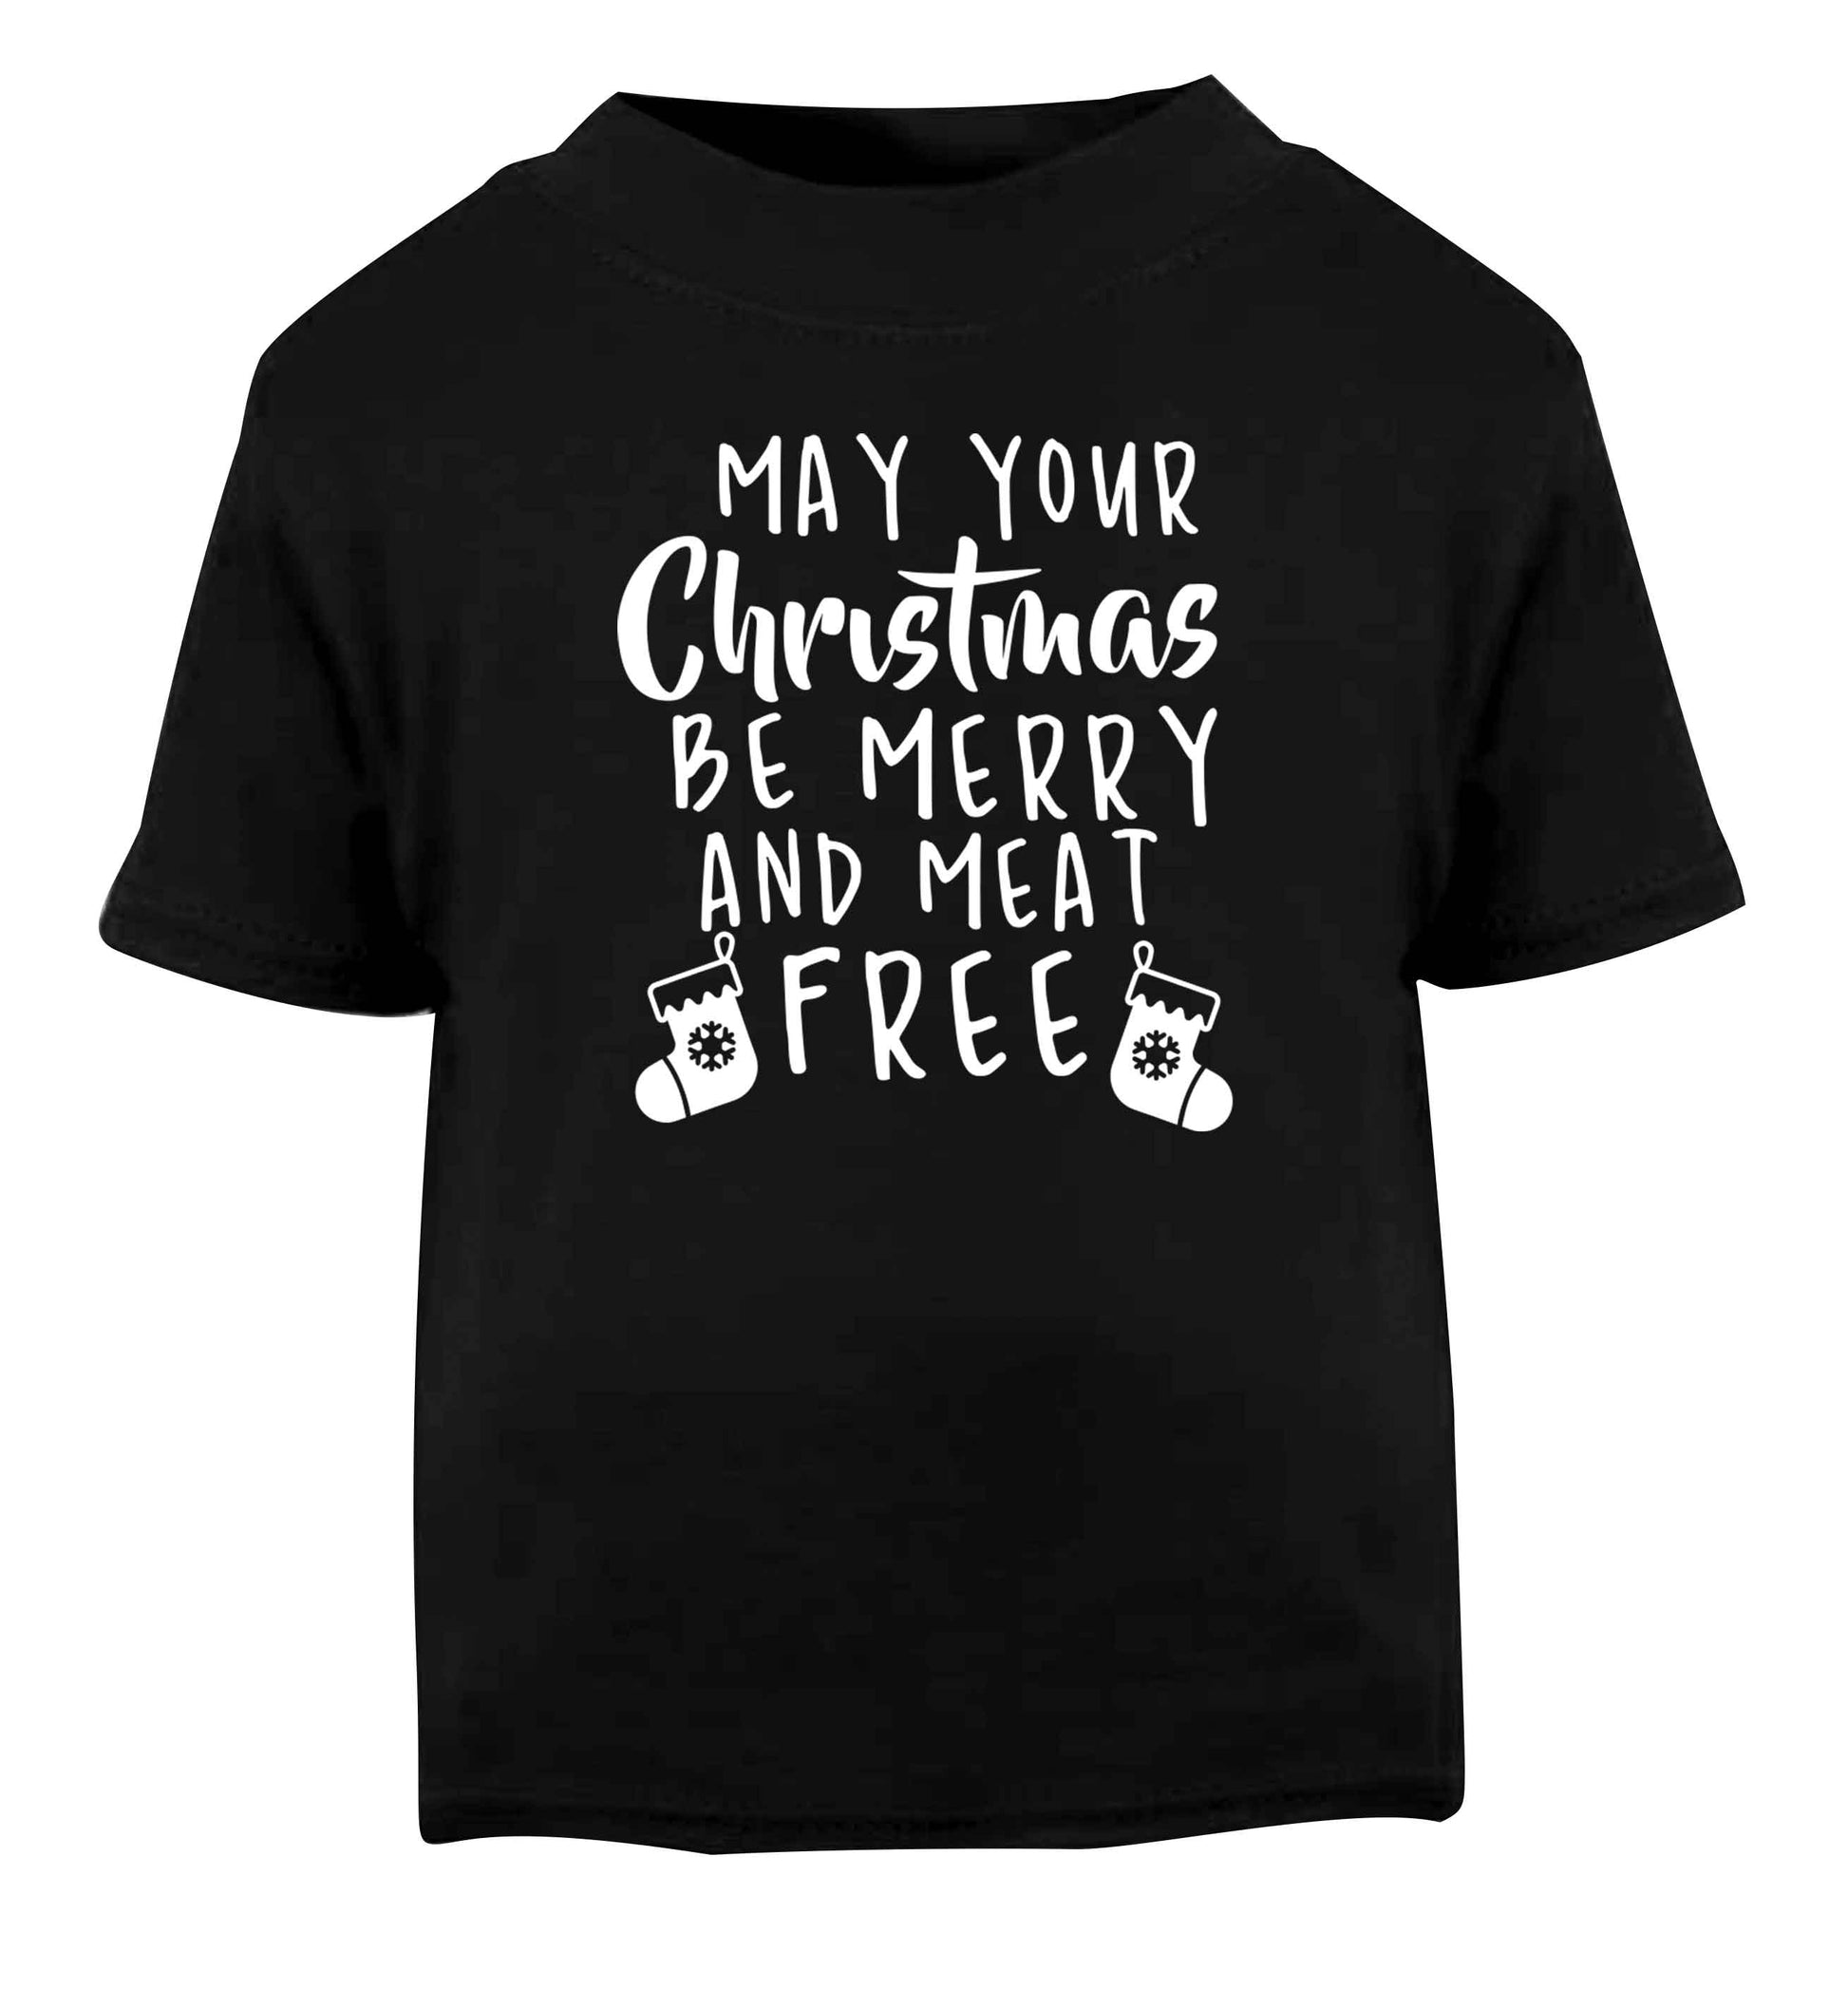 May your Christmas be merry and meat free Black Baby Toddler Tshirt 2 years